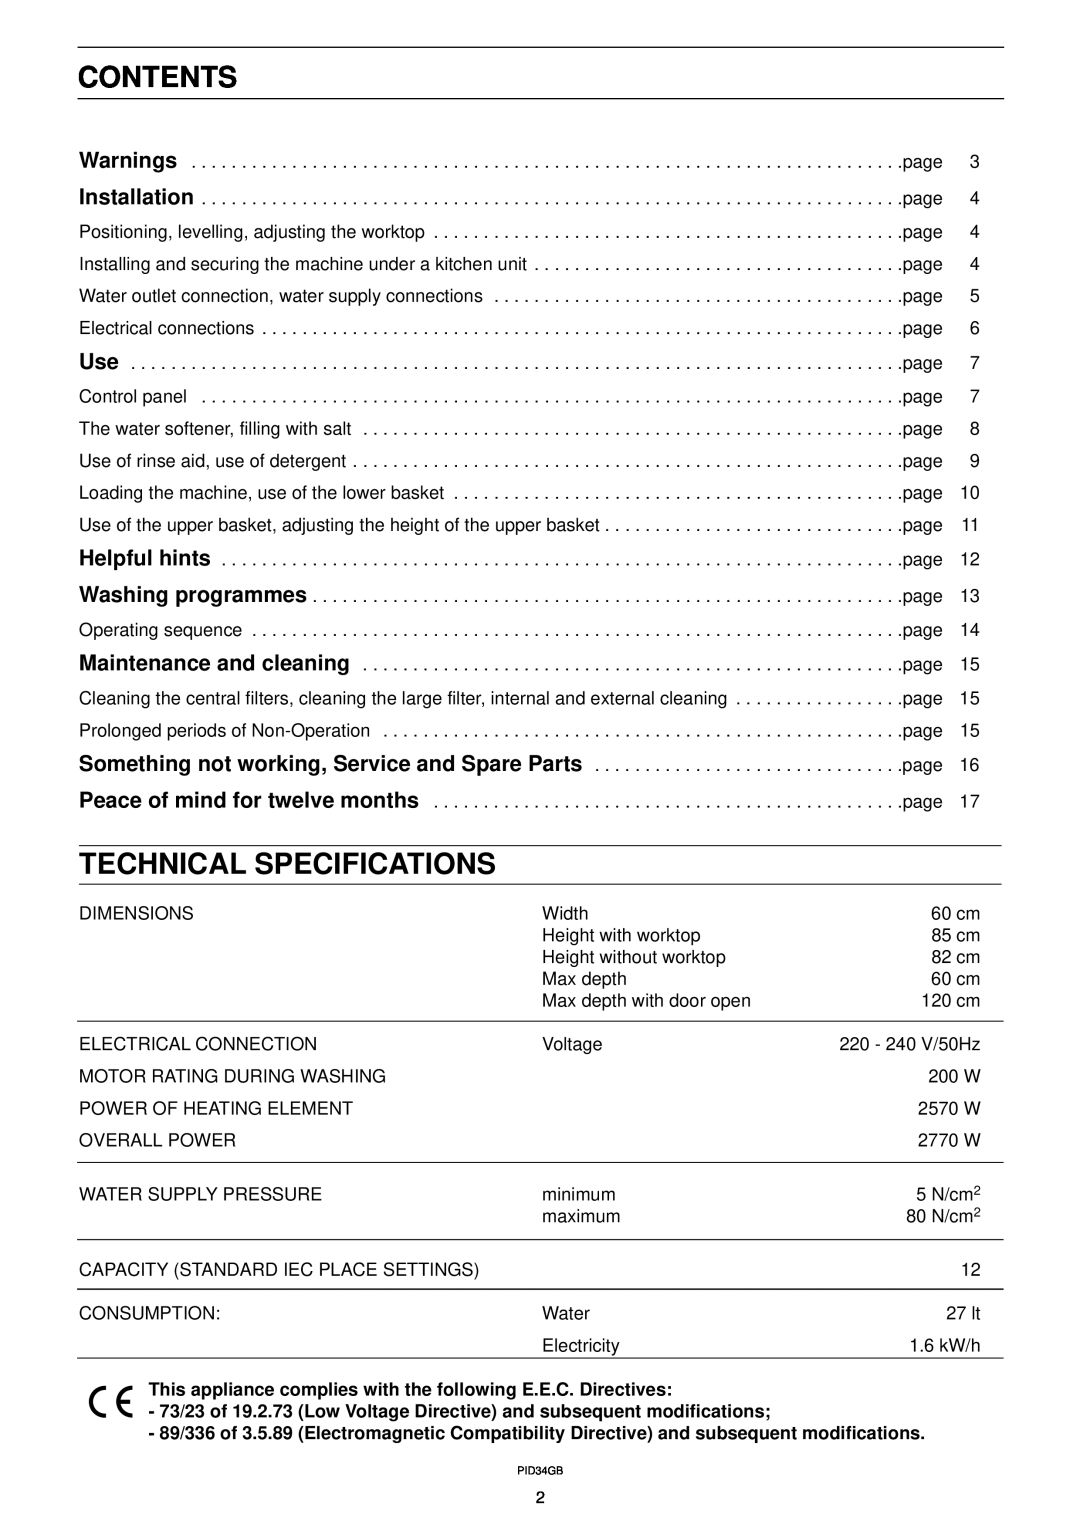 Zanussi DW 911 manual Contents, Technical Specifications, Peace of mind for twelve months 